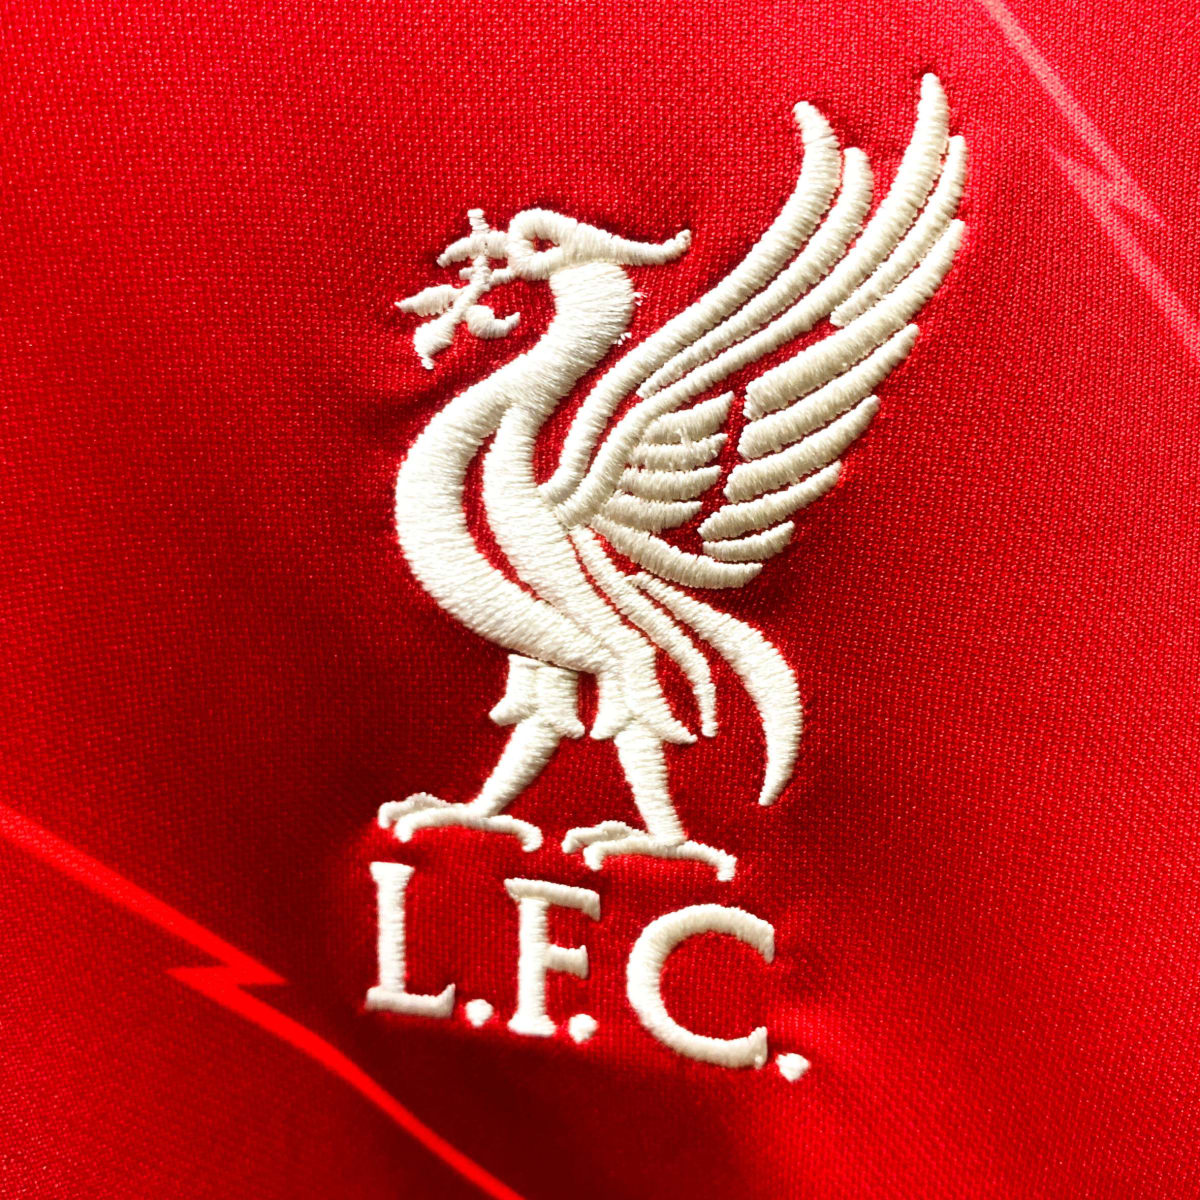 Leaked: More Image Of Liverpool's Nike Home Kit For 2022 23 Season Emerge Online Illustrated Liverpool FC News, Analysis, And More